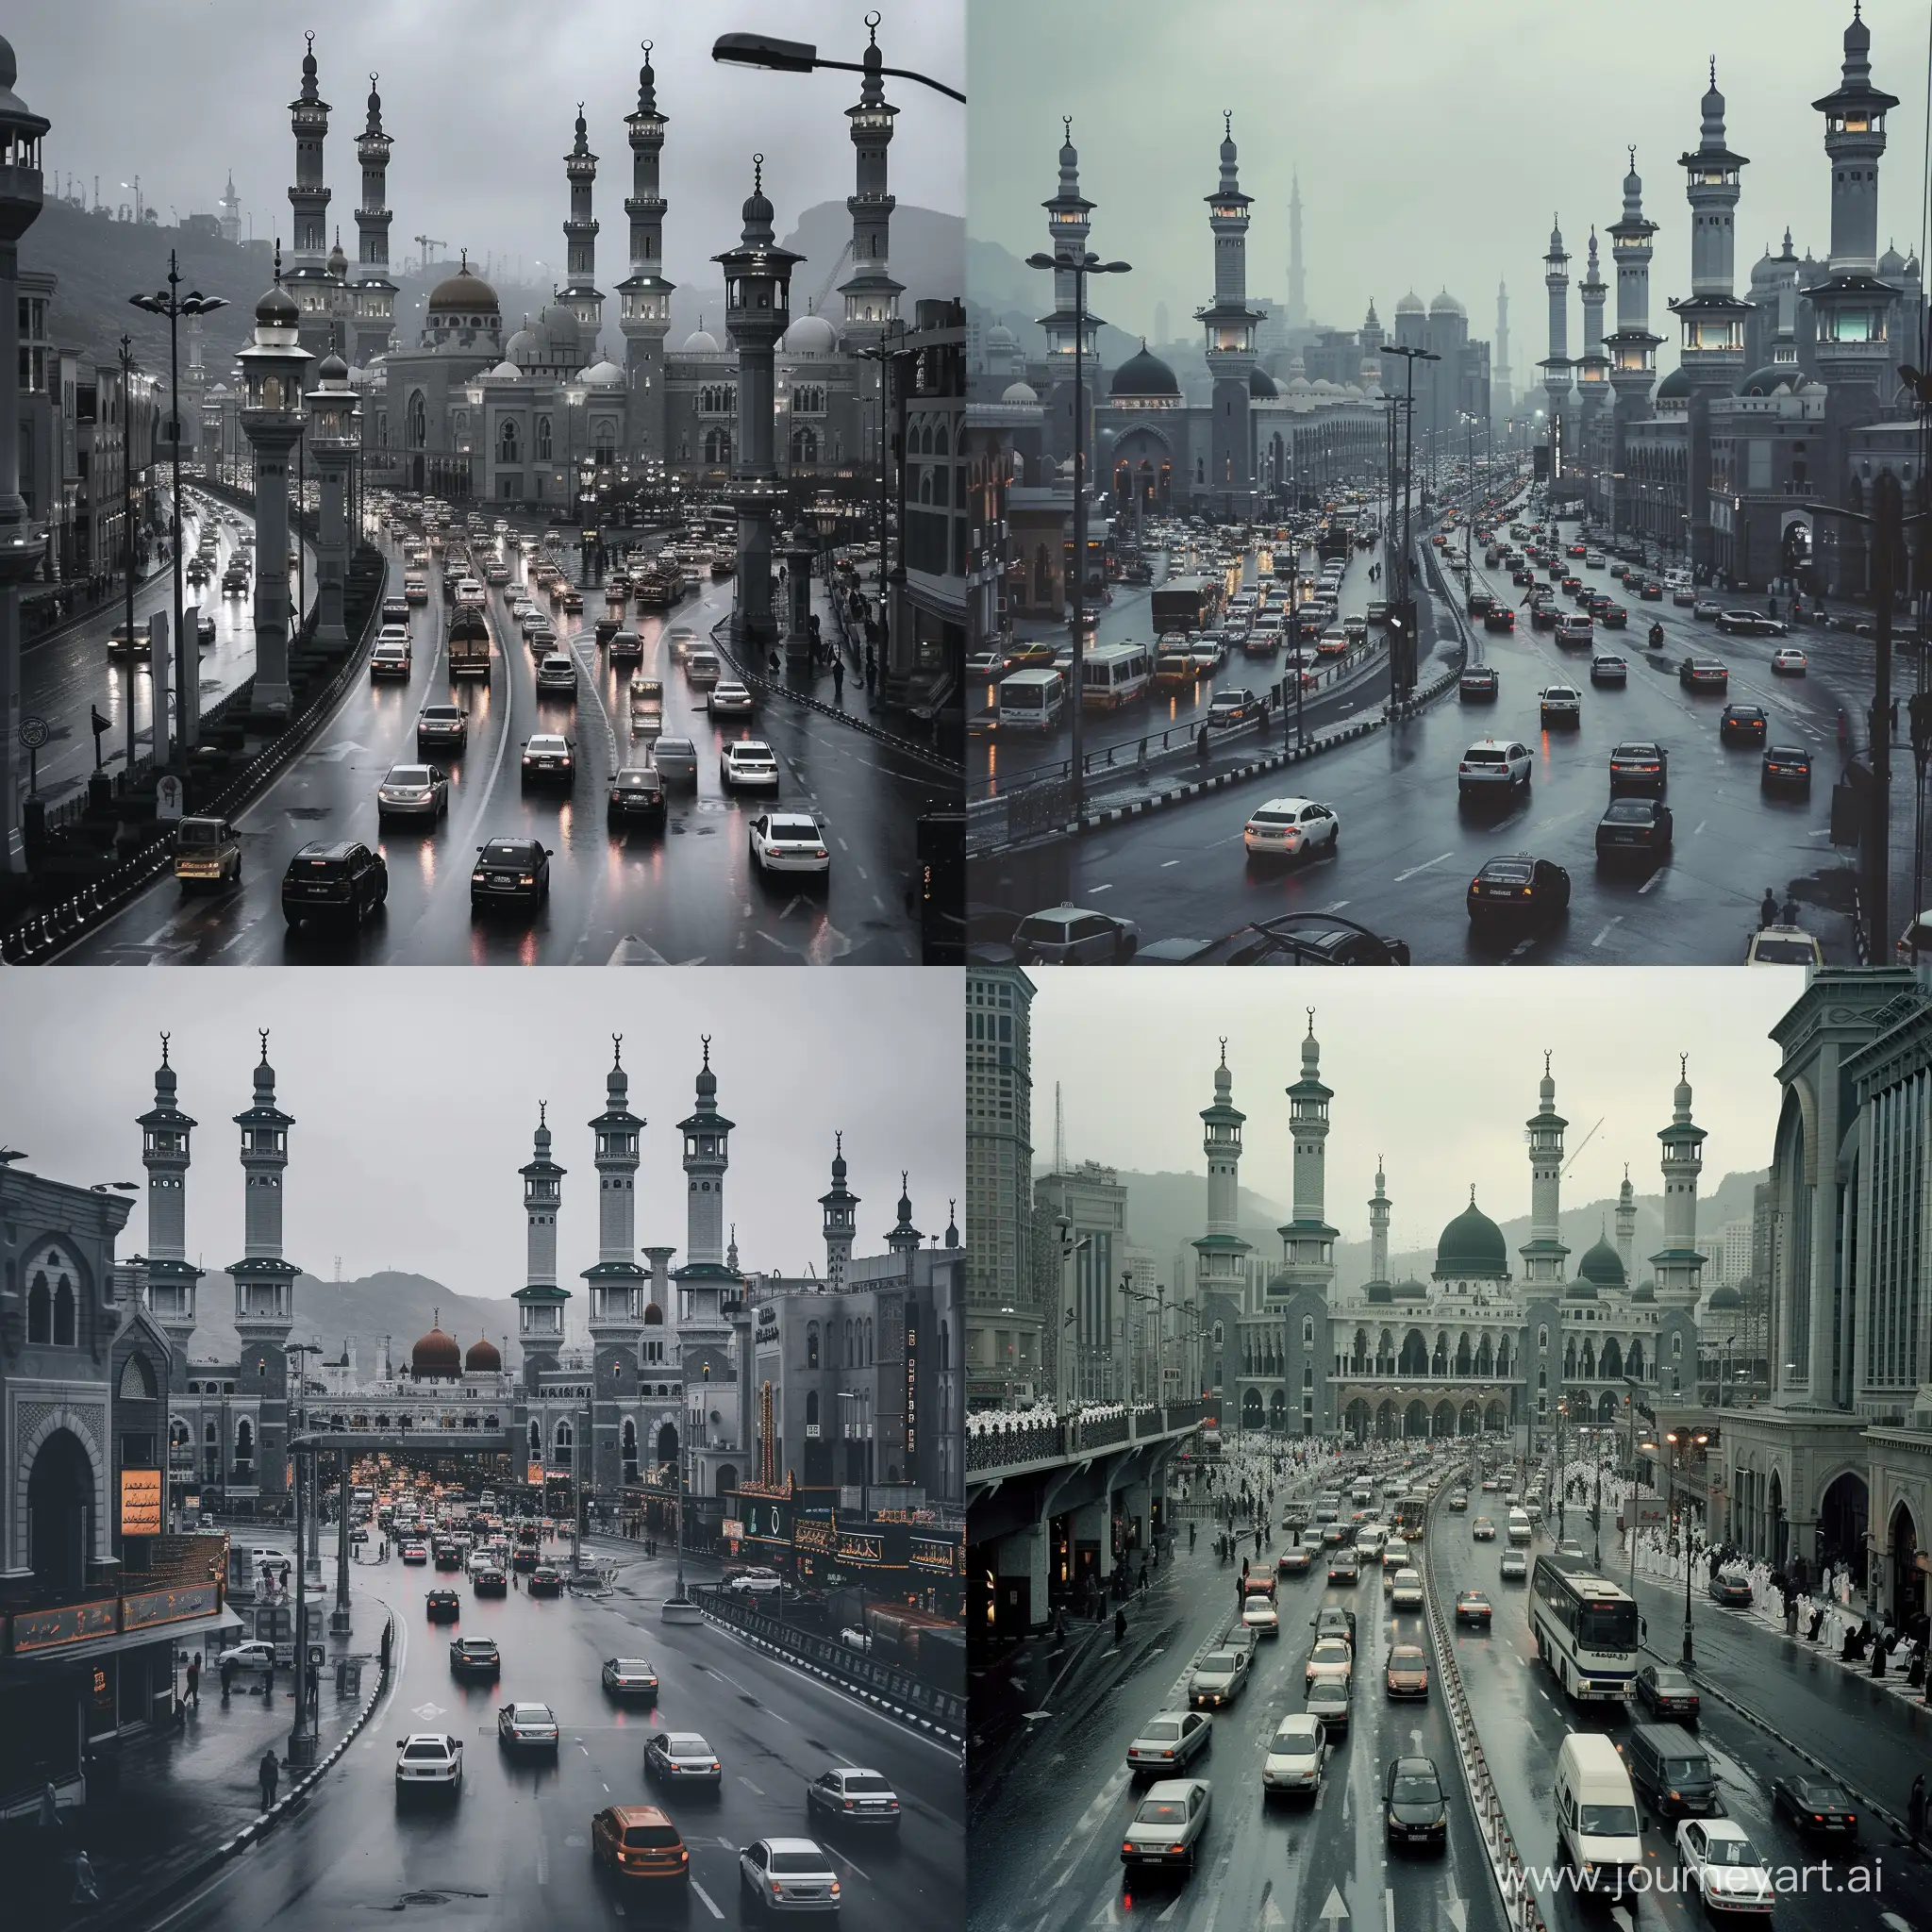 Mecca-Grand-Mosque-Architectures-at-Busy-Street-Intersection-on-a-Grey-Day